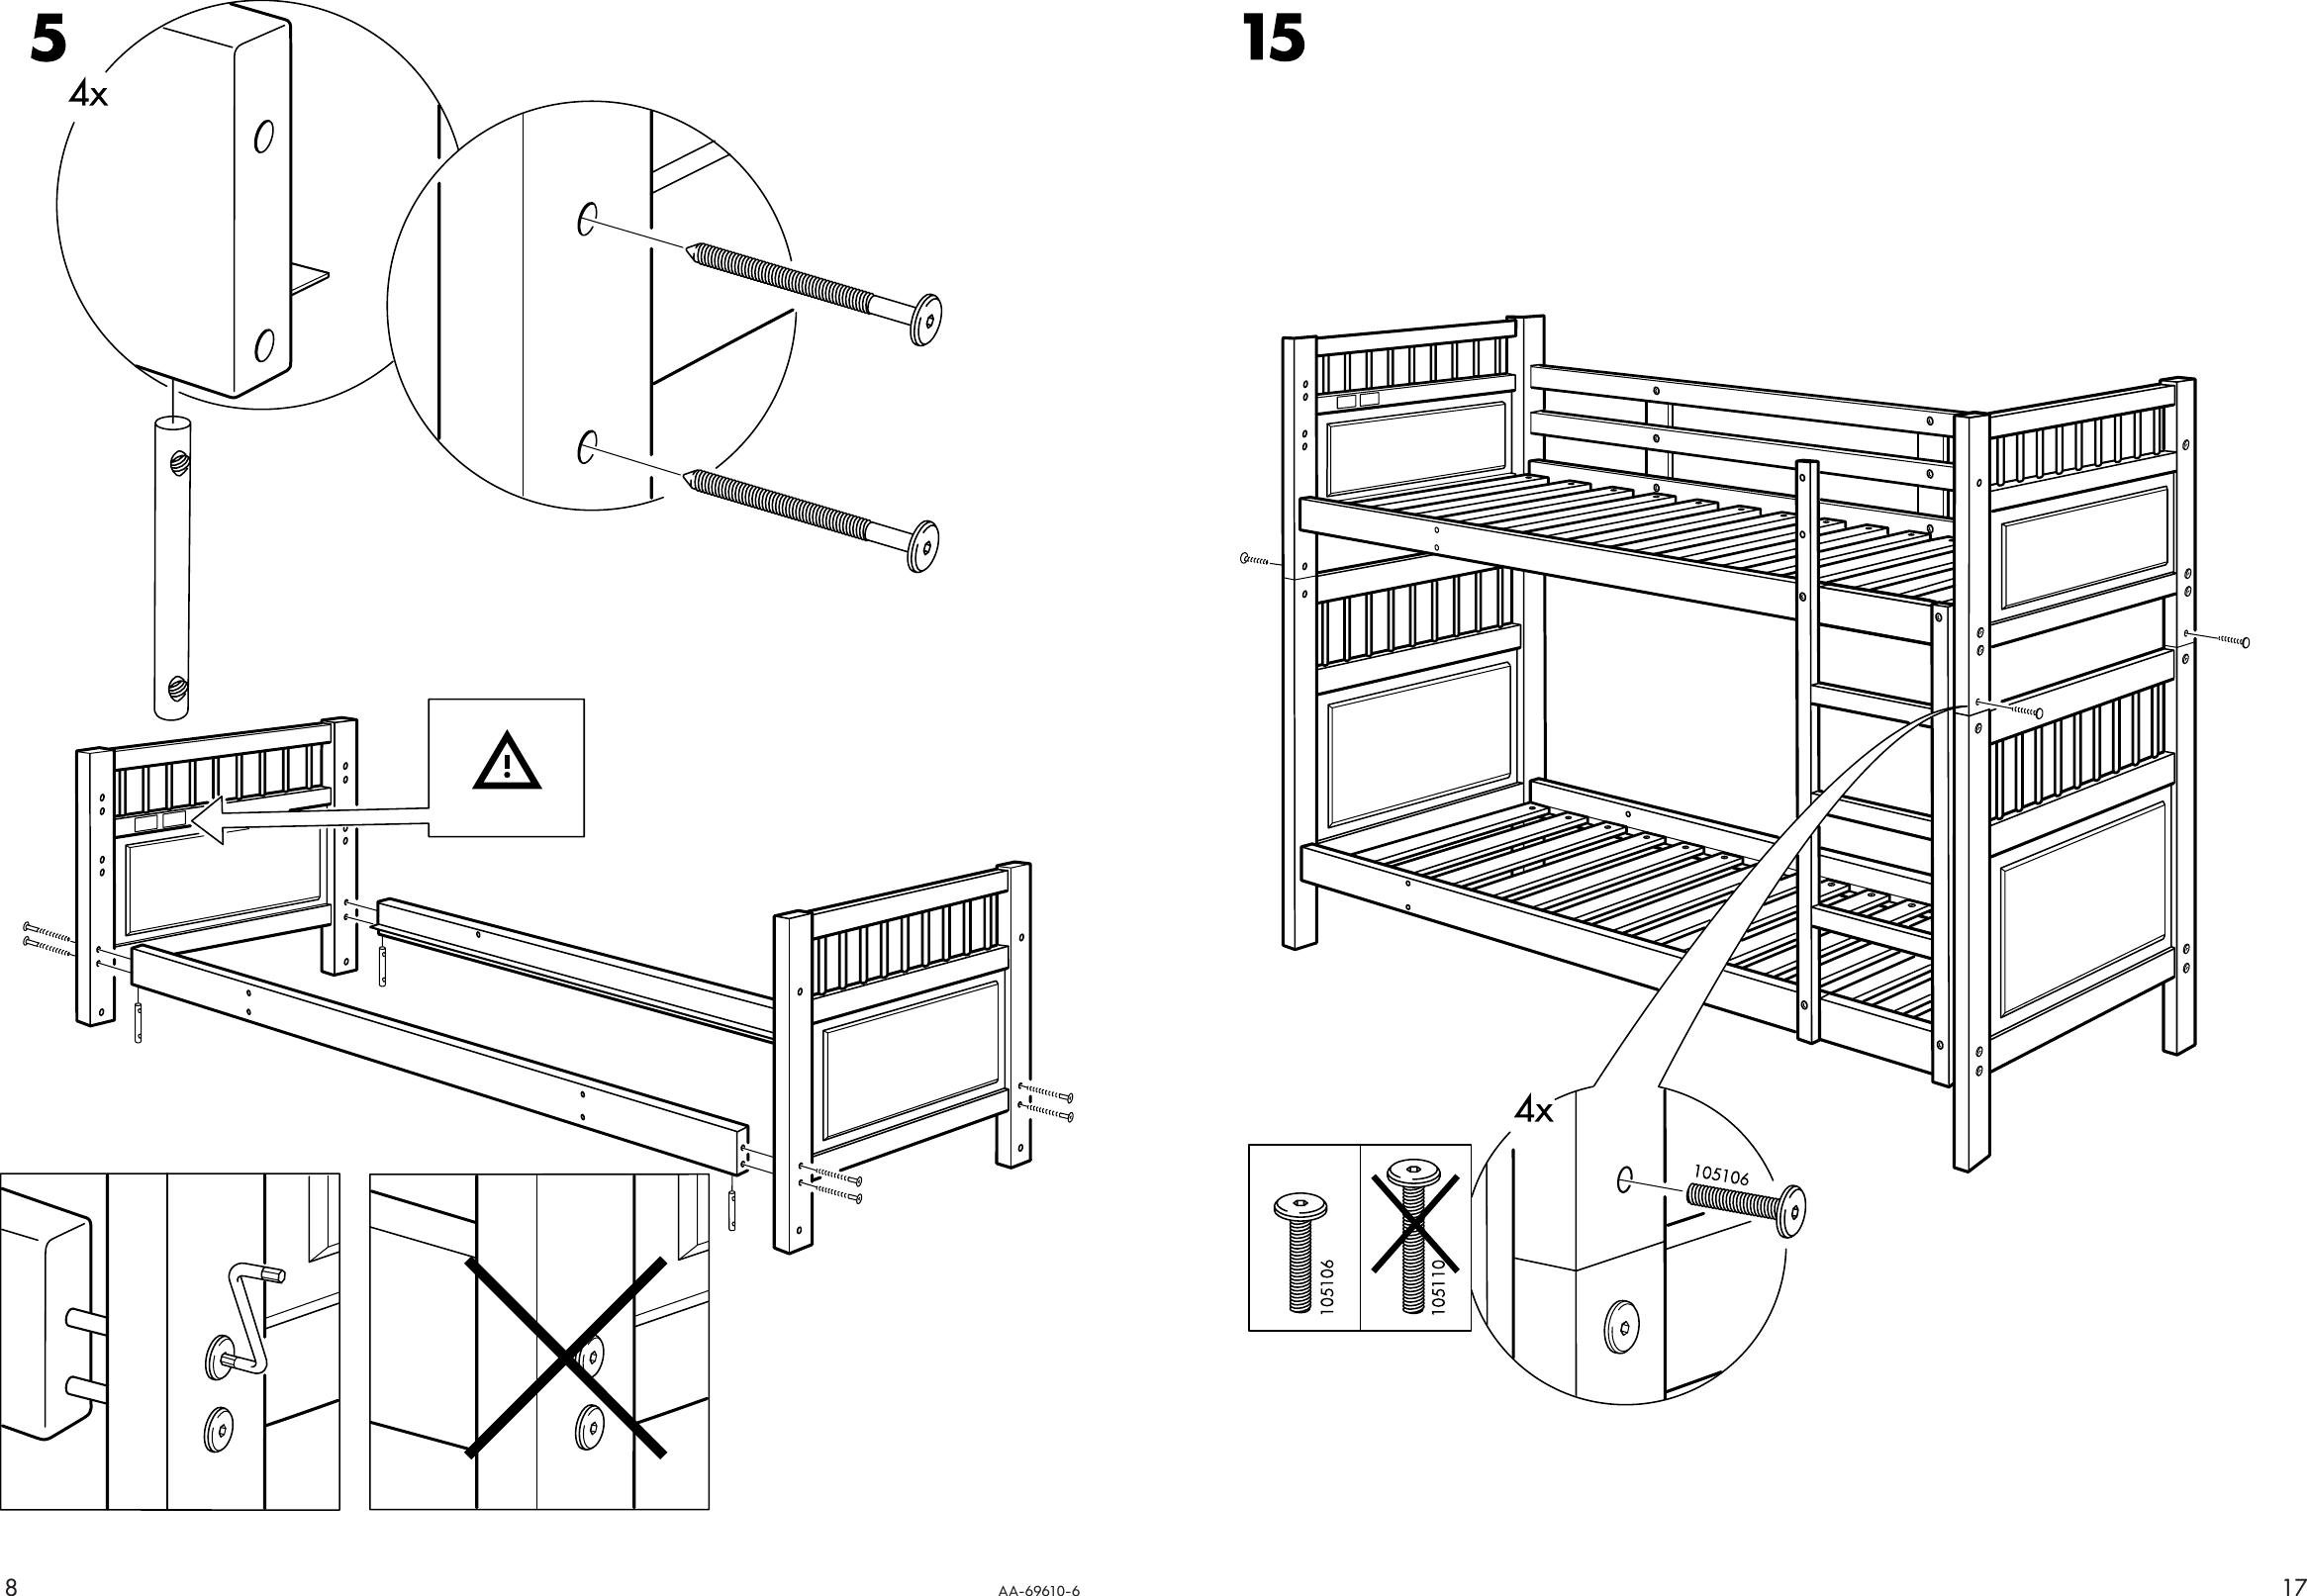 Ikea Hemnes Bunk Bedframe Twin Assembly, Ikea Bunk Bed Assembly Instructions